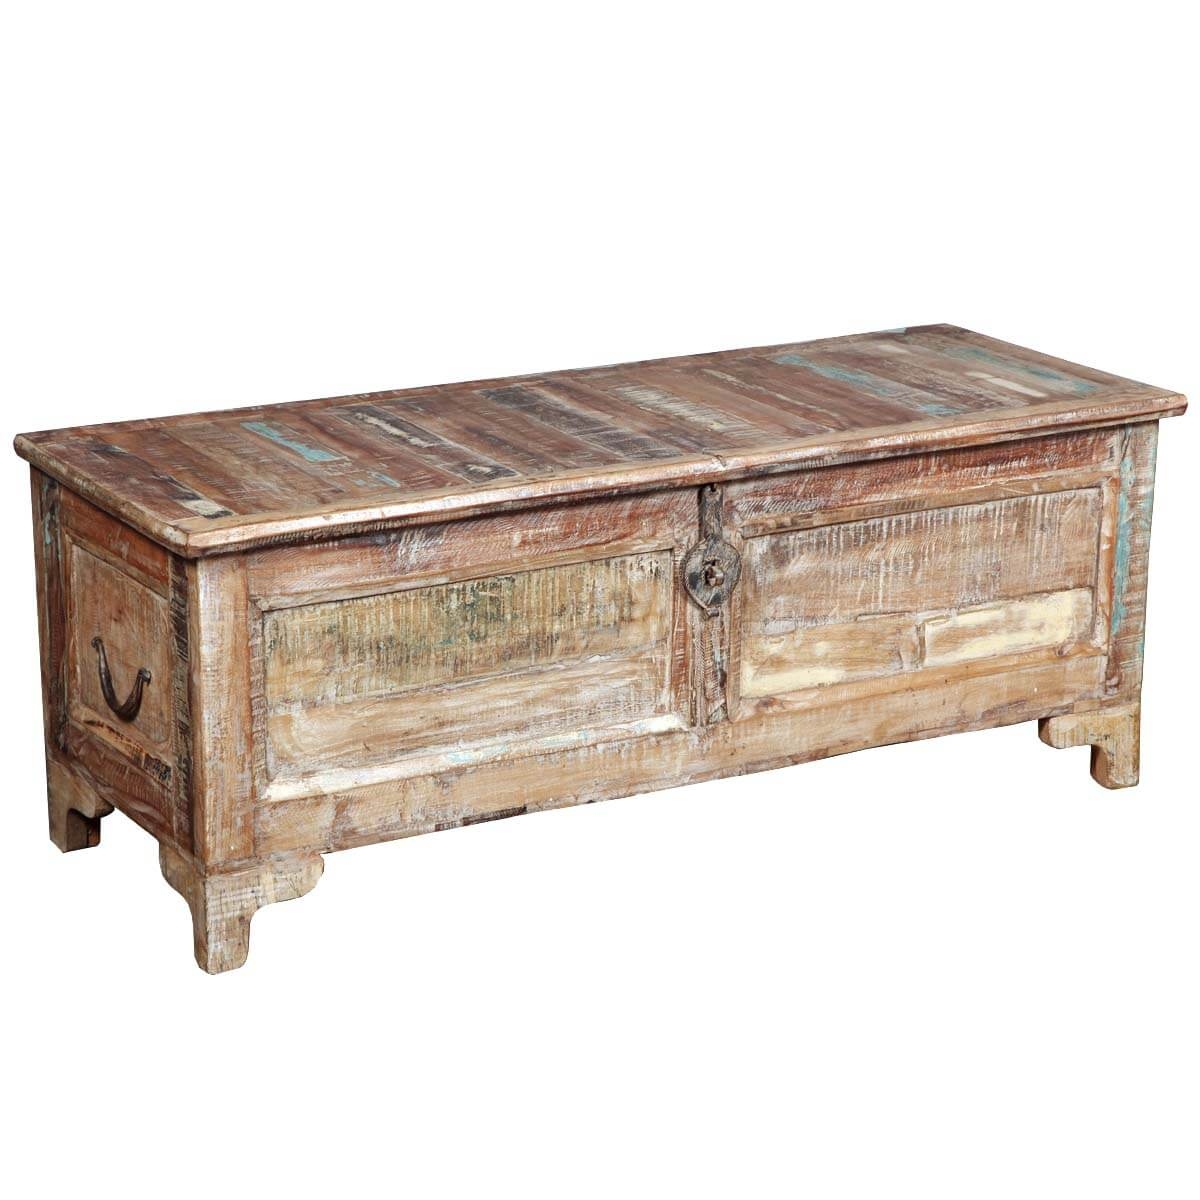 Rustic Oversized Reclaimed Wood Storage Coffee Table Chest Storage Box Trunk